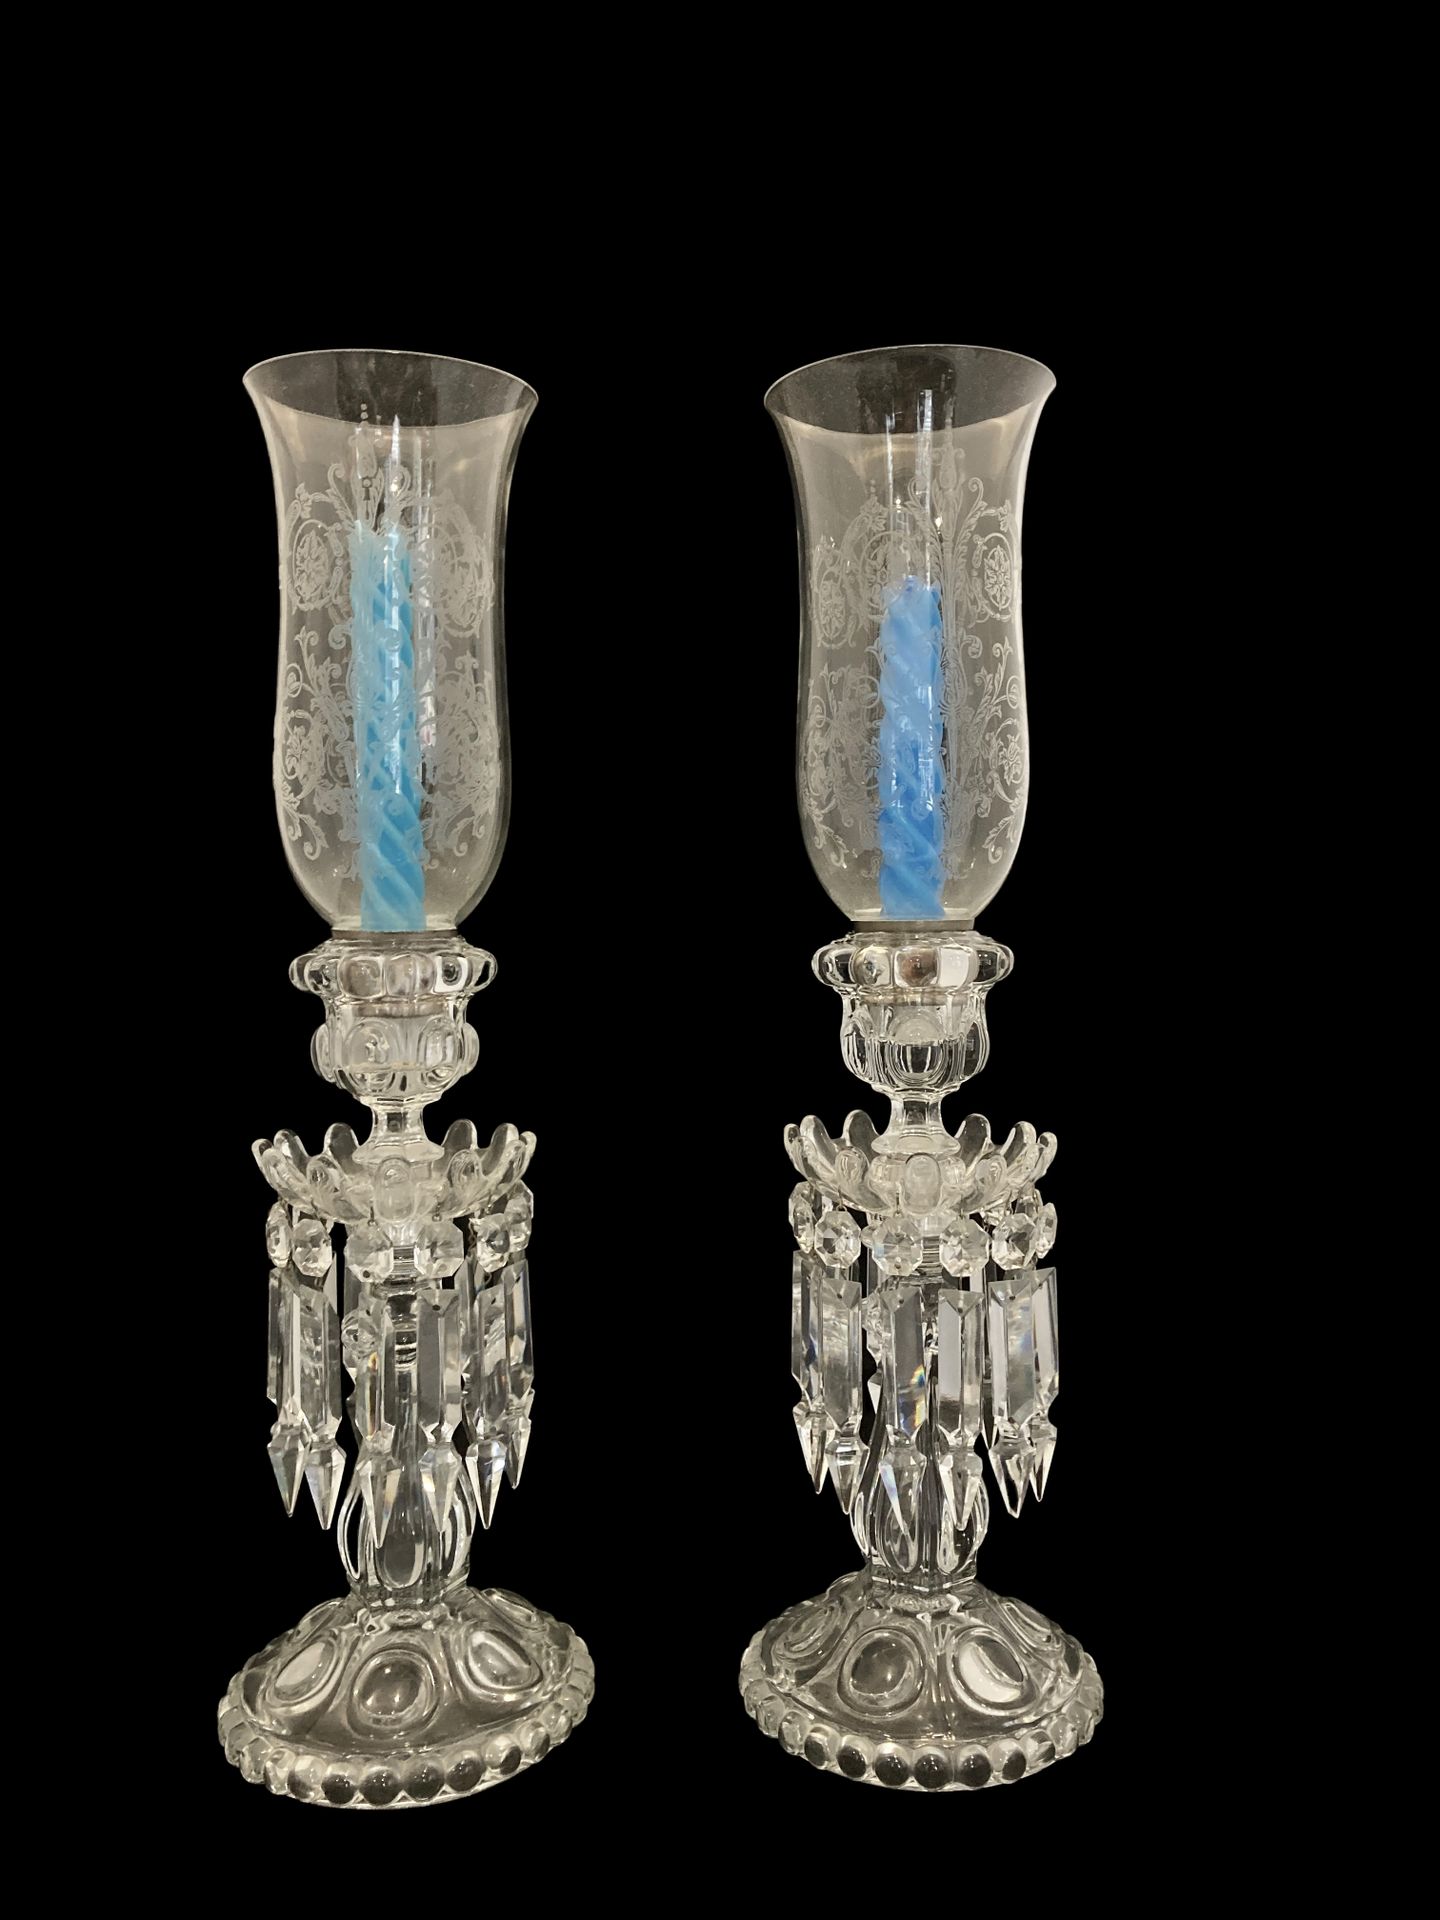 Null BACCARAT.
Pair of candlesticks with pampilles out of moulded, cut and engra&hellip;